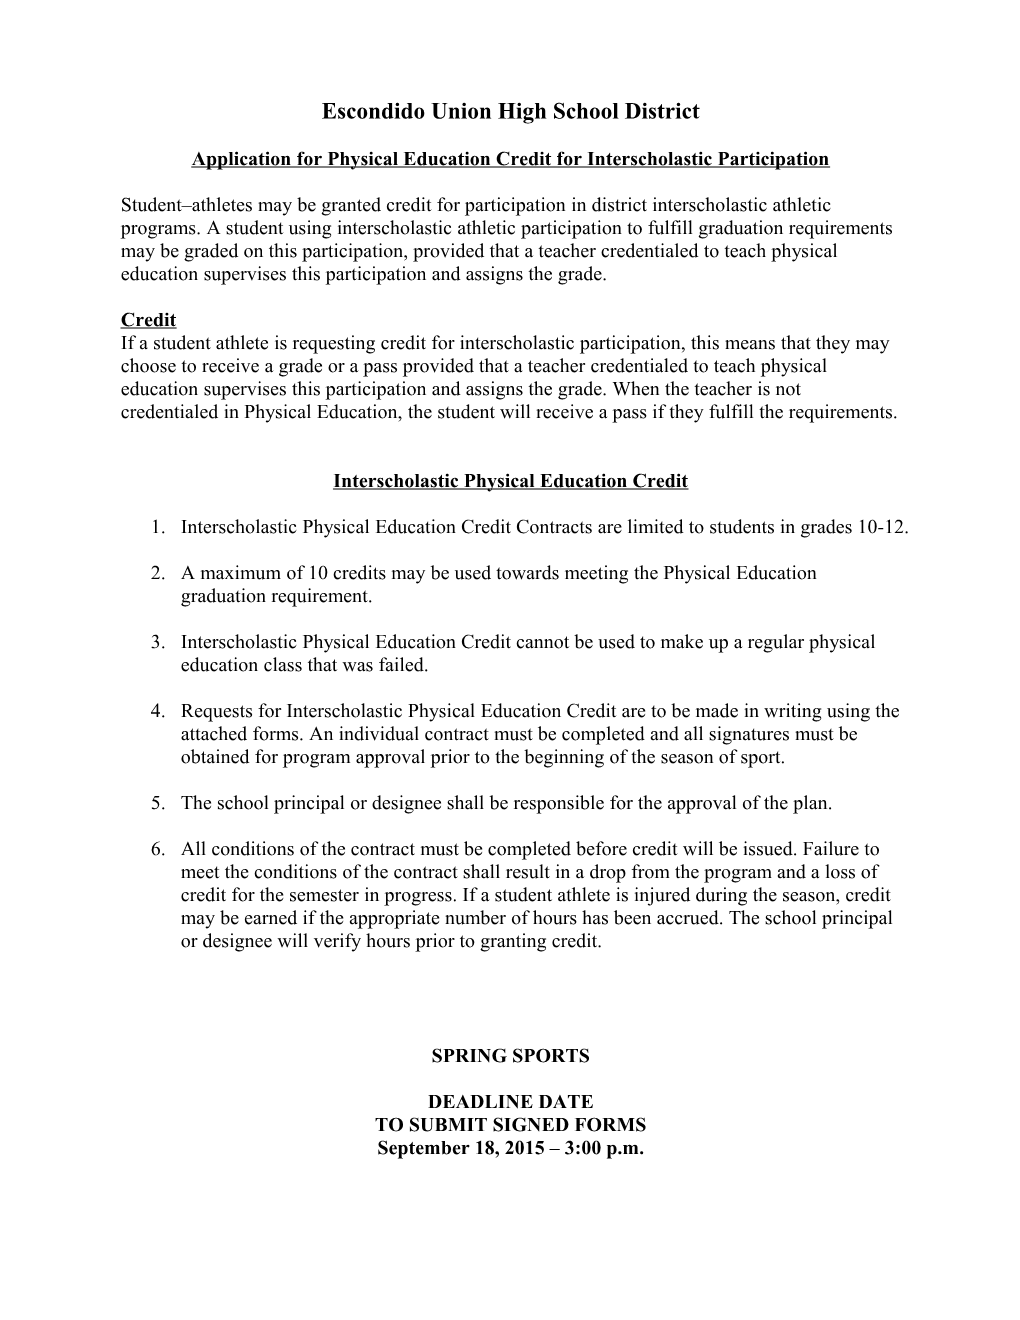 Application for Physical Education Credit for Interscholastic Participation